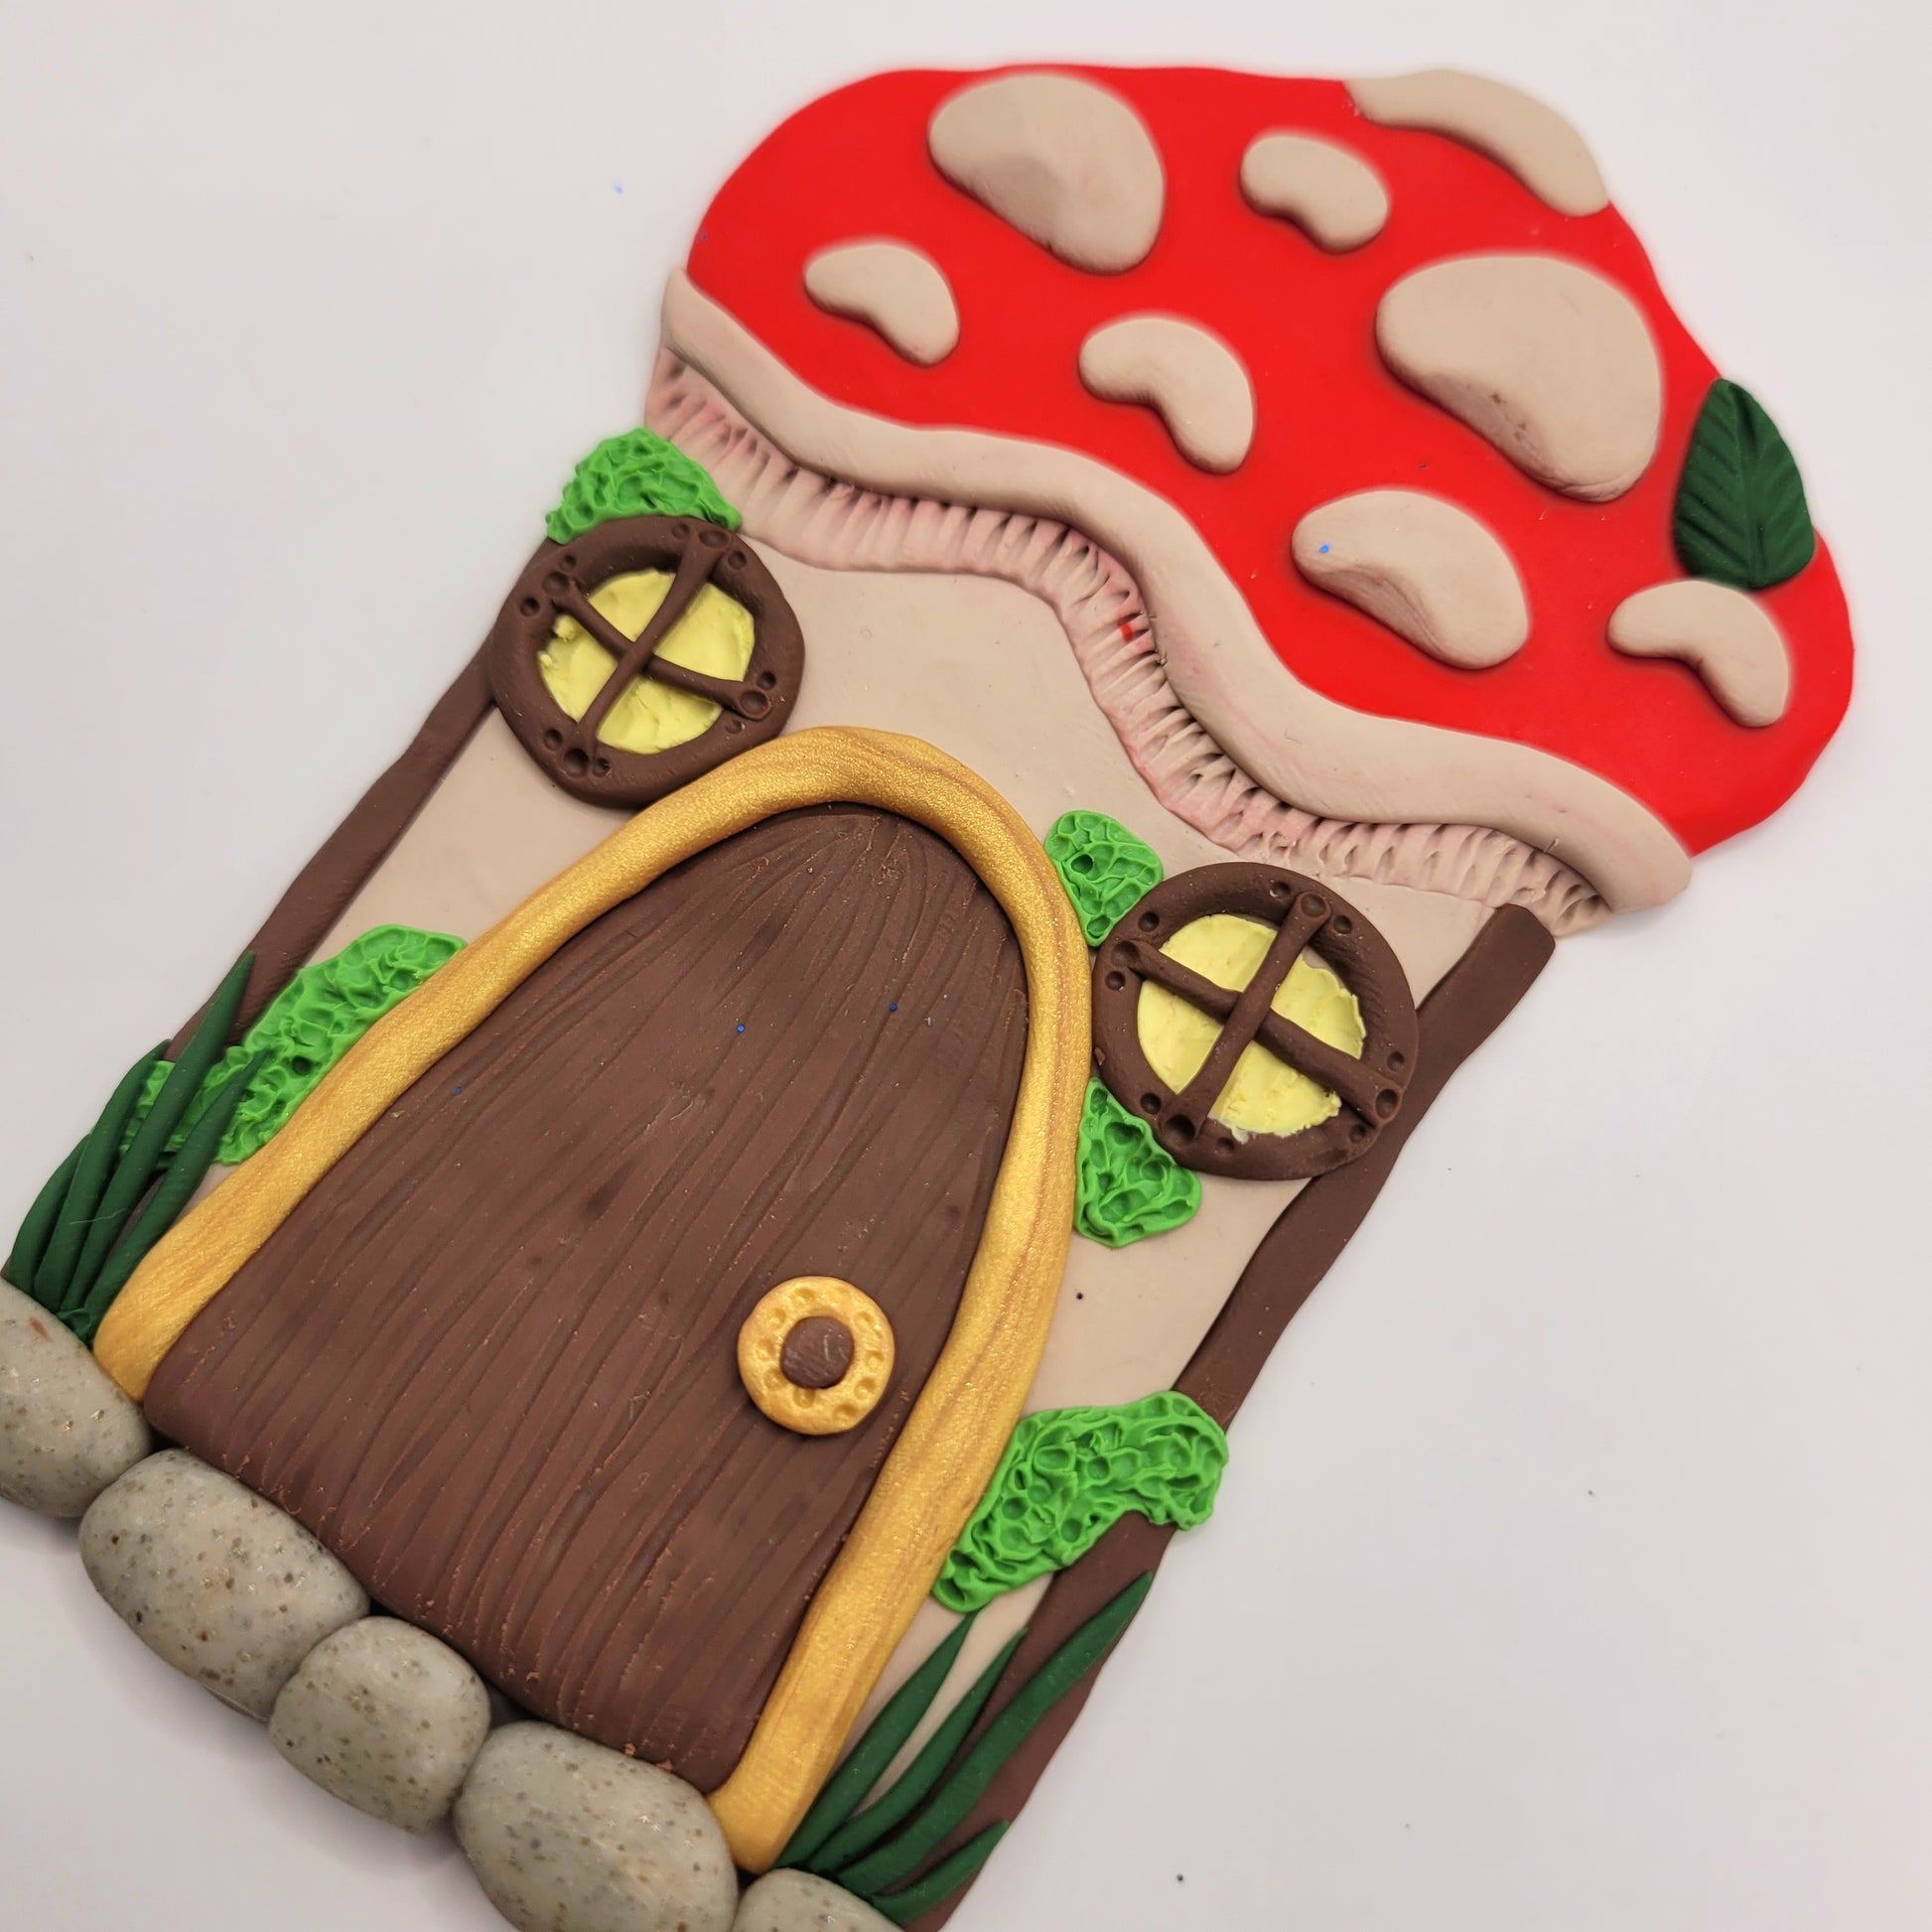 The mushroom door is shown at a close up angle. The mushroom's cap is bright red with beige textured spots and a green leaf. The stem of the mushroom is beige and is detailed with two windows, a door, green moss and grass, and a cobblestone step.